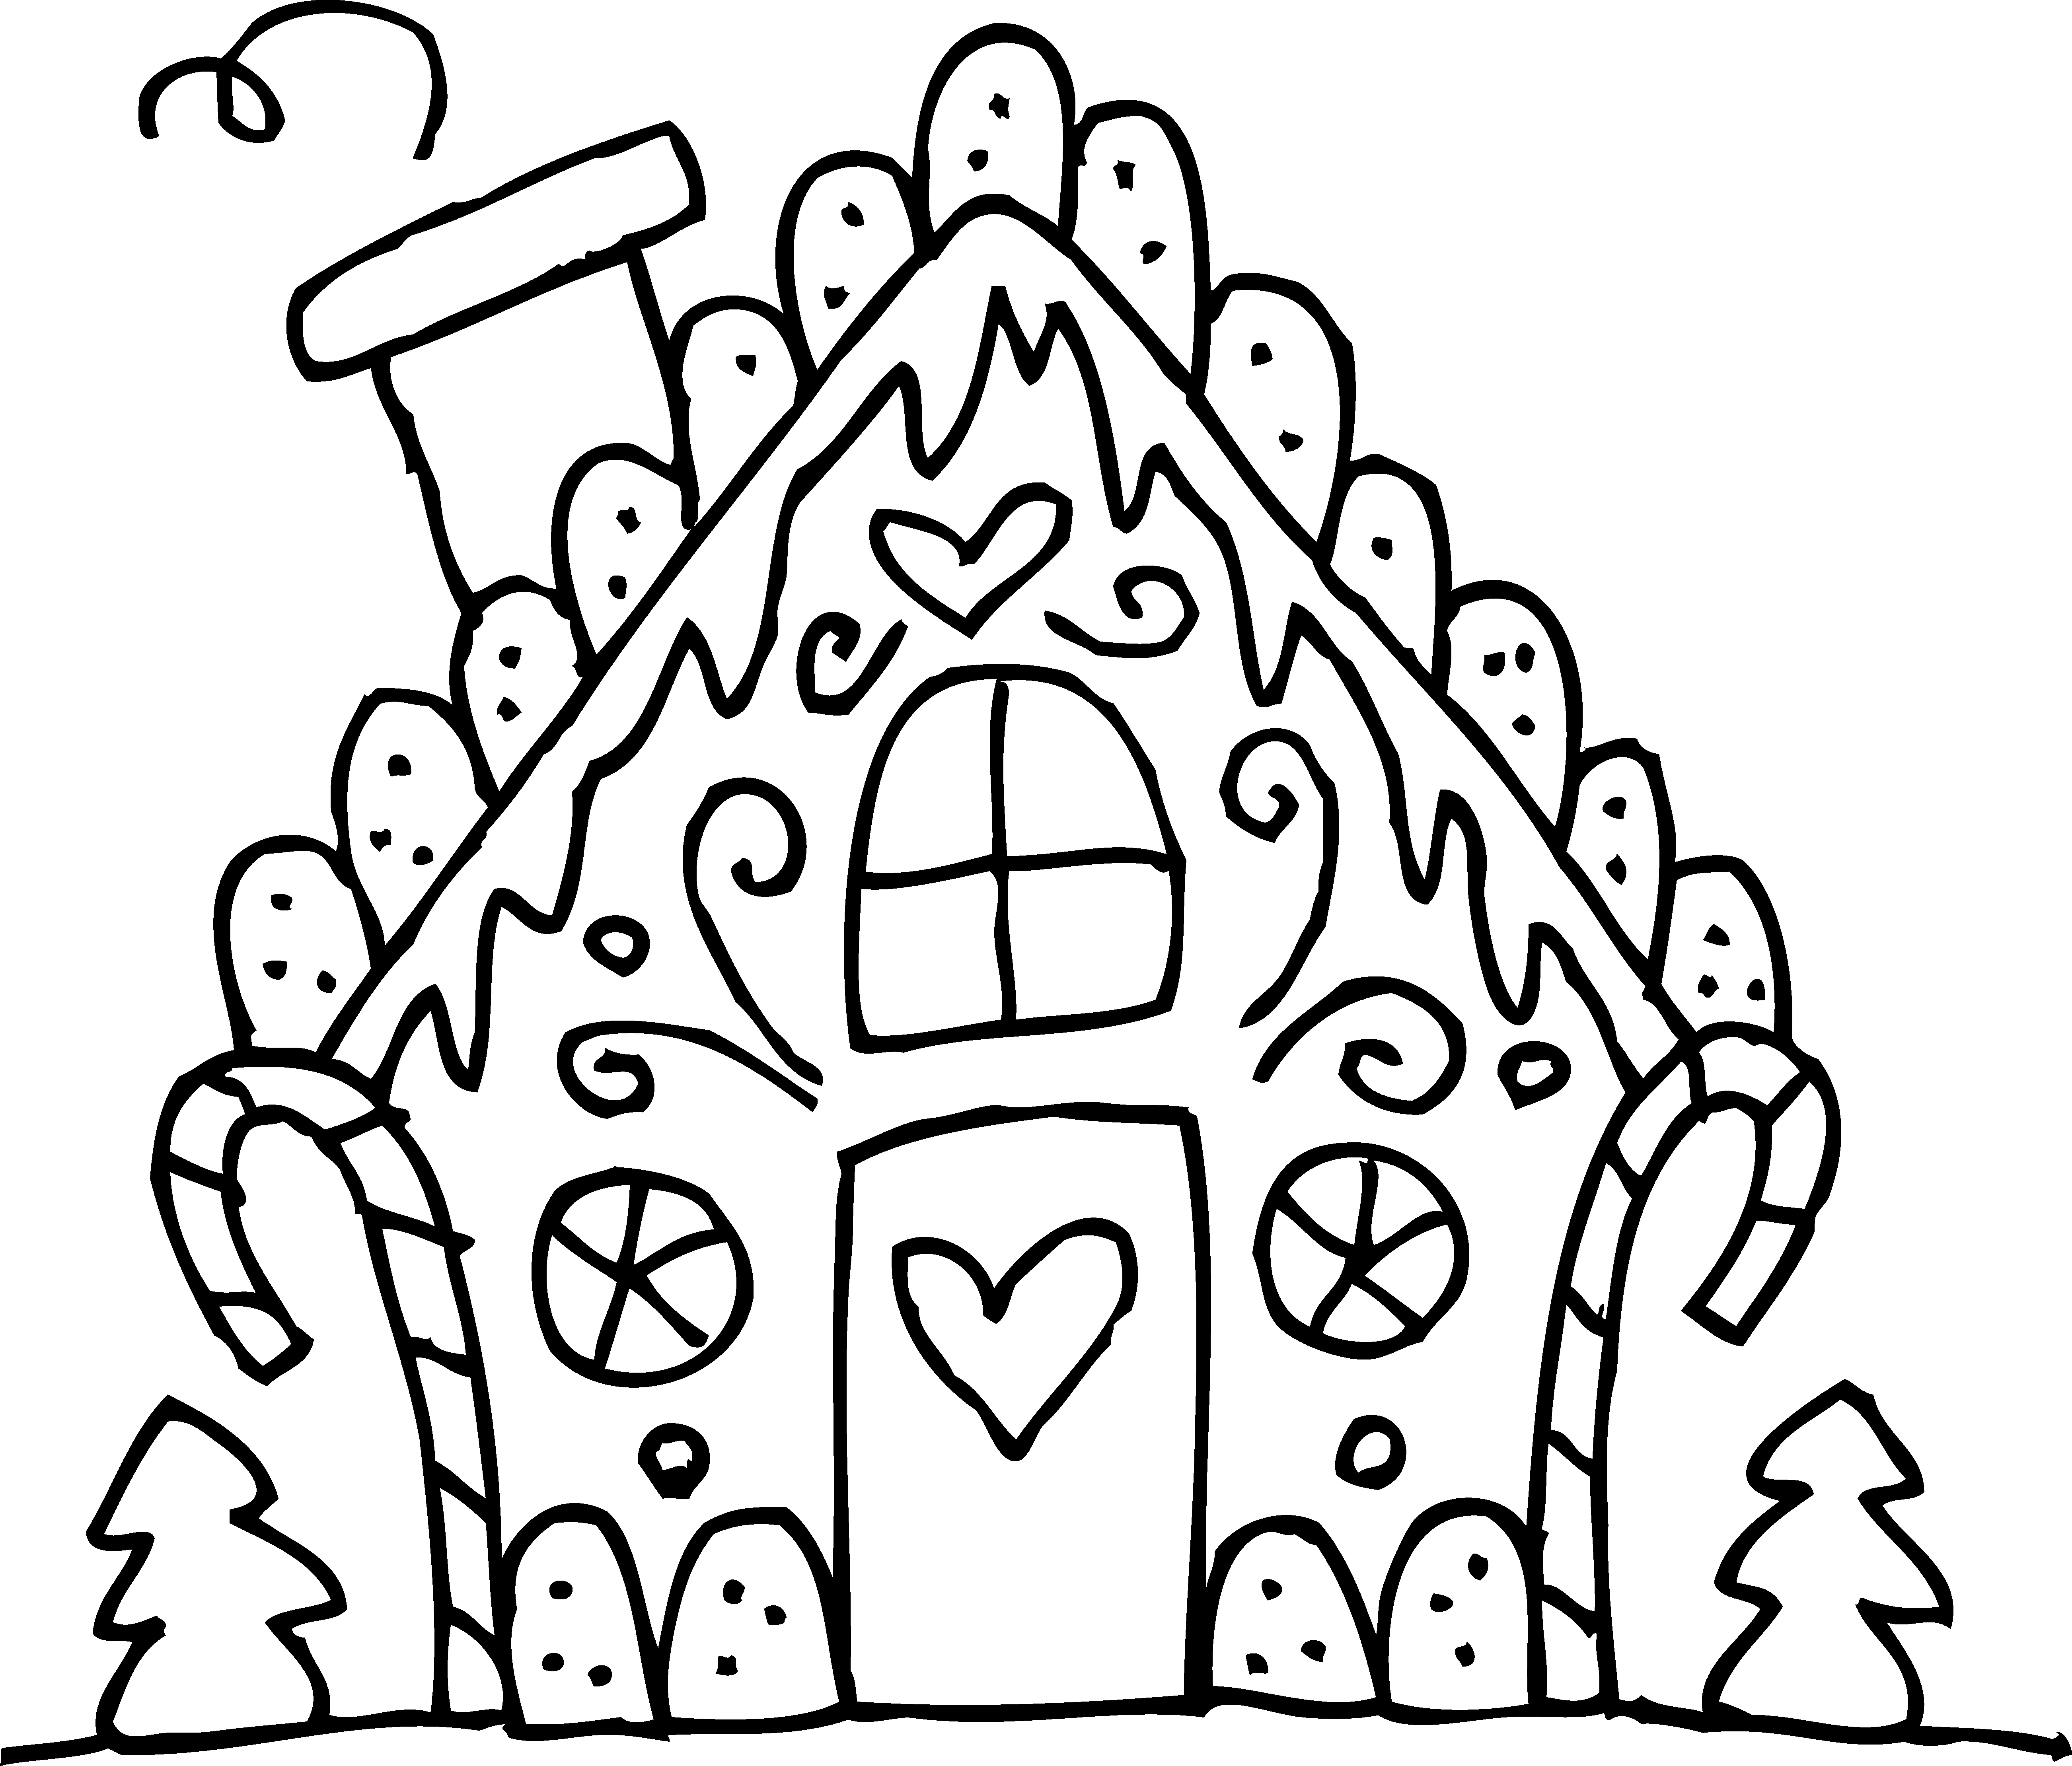 Free clipart gingerbread house and men - ClipartFox